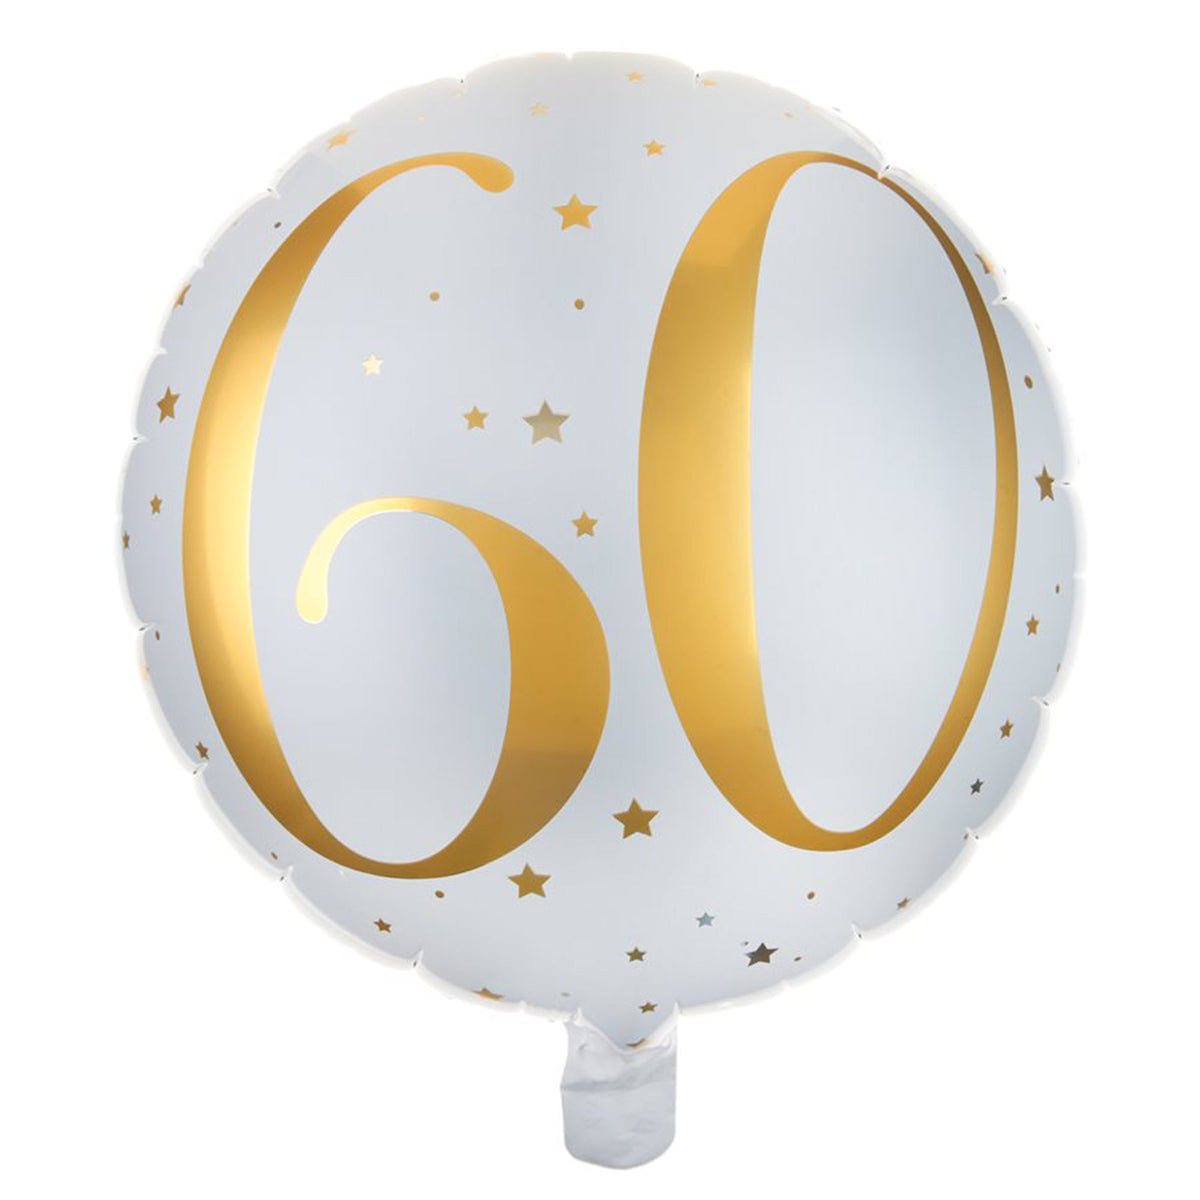 LE GROUPE BLC INTL INC Balloons Gold Trendy Age 60th Birthday Foil Balloon, 18 Inches, 1 Count 3660380045069